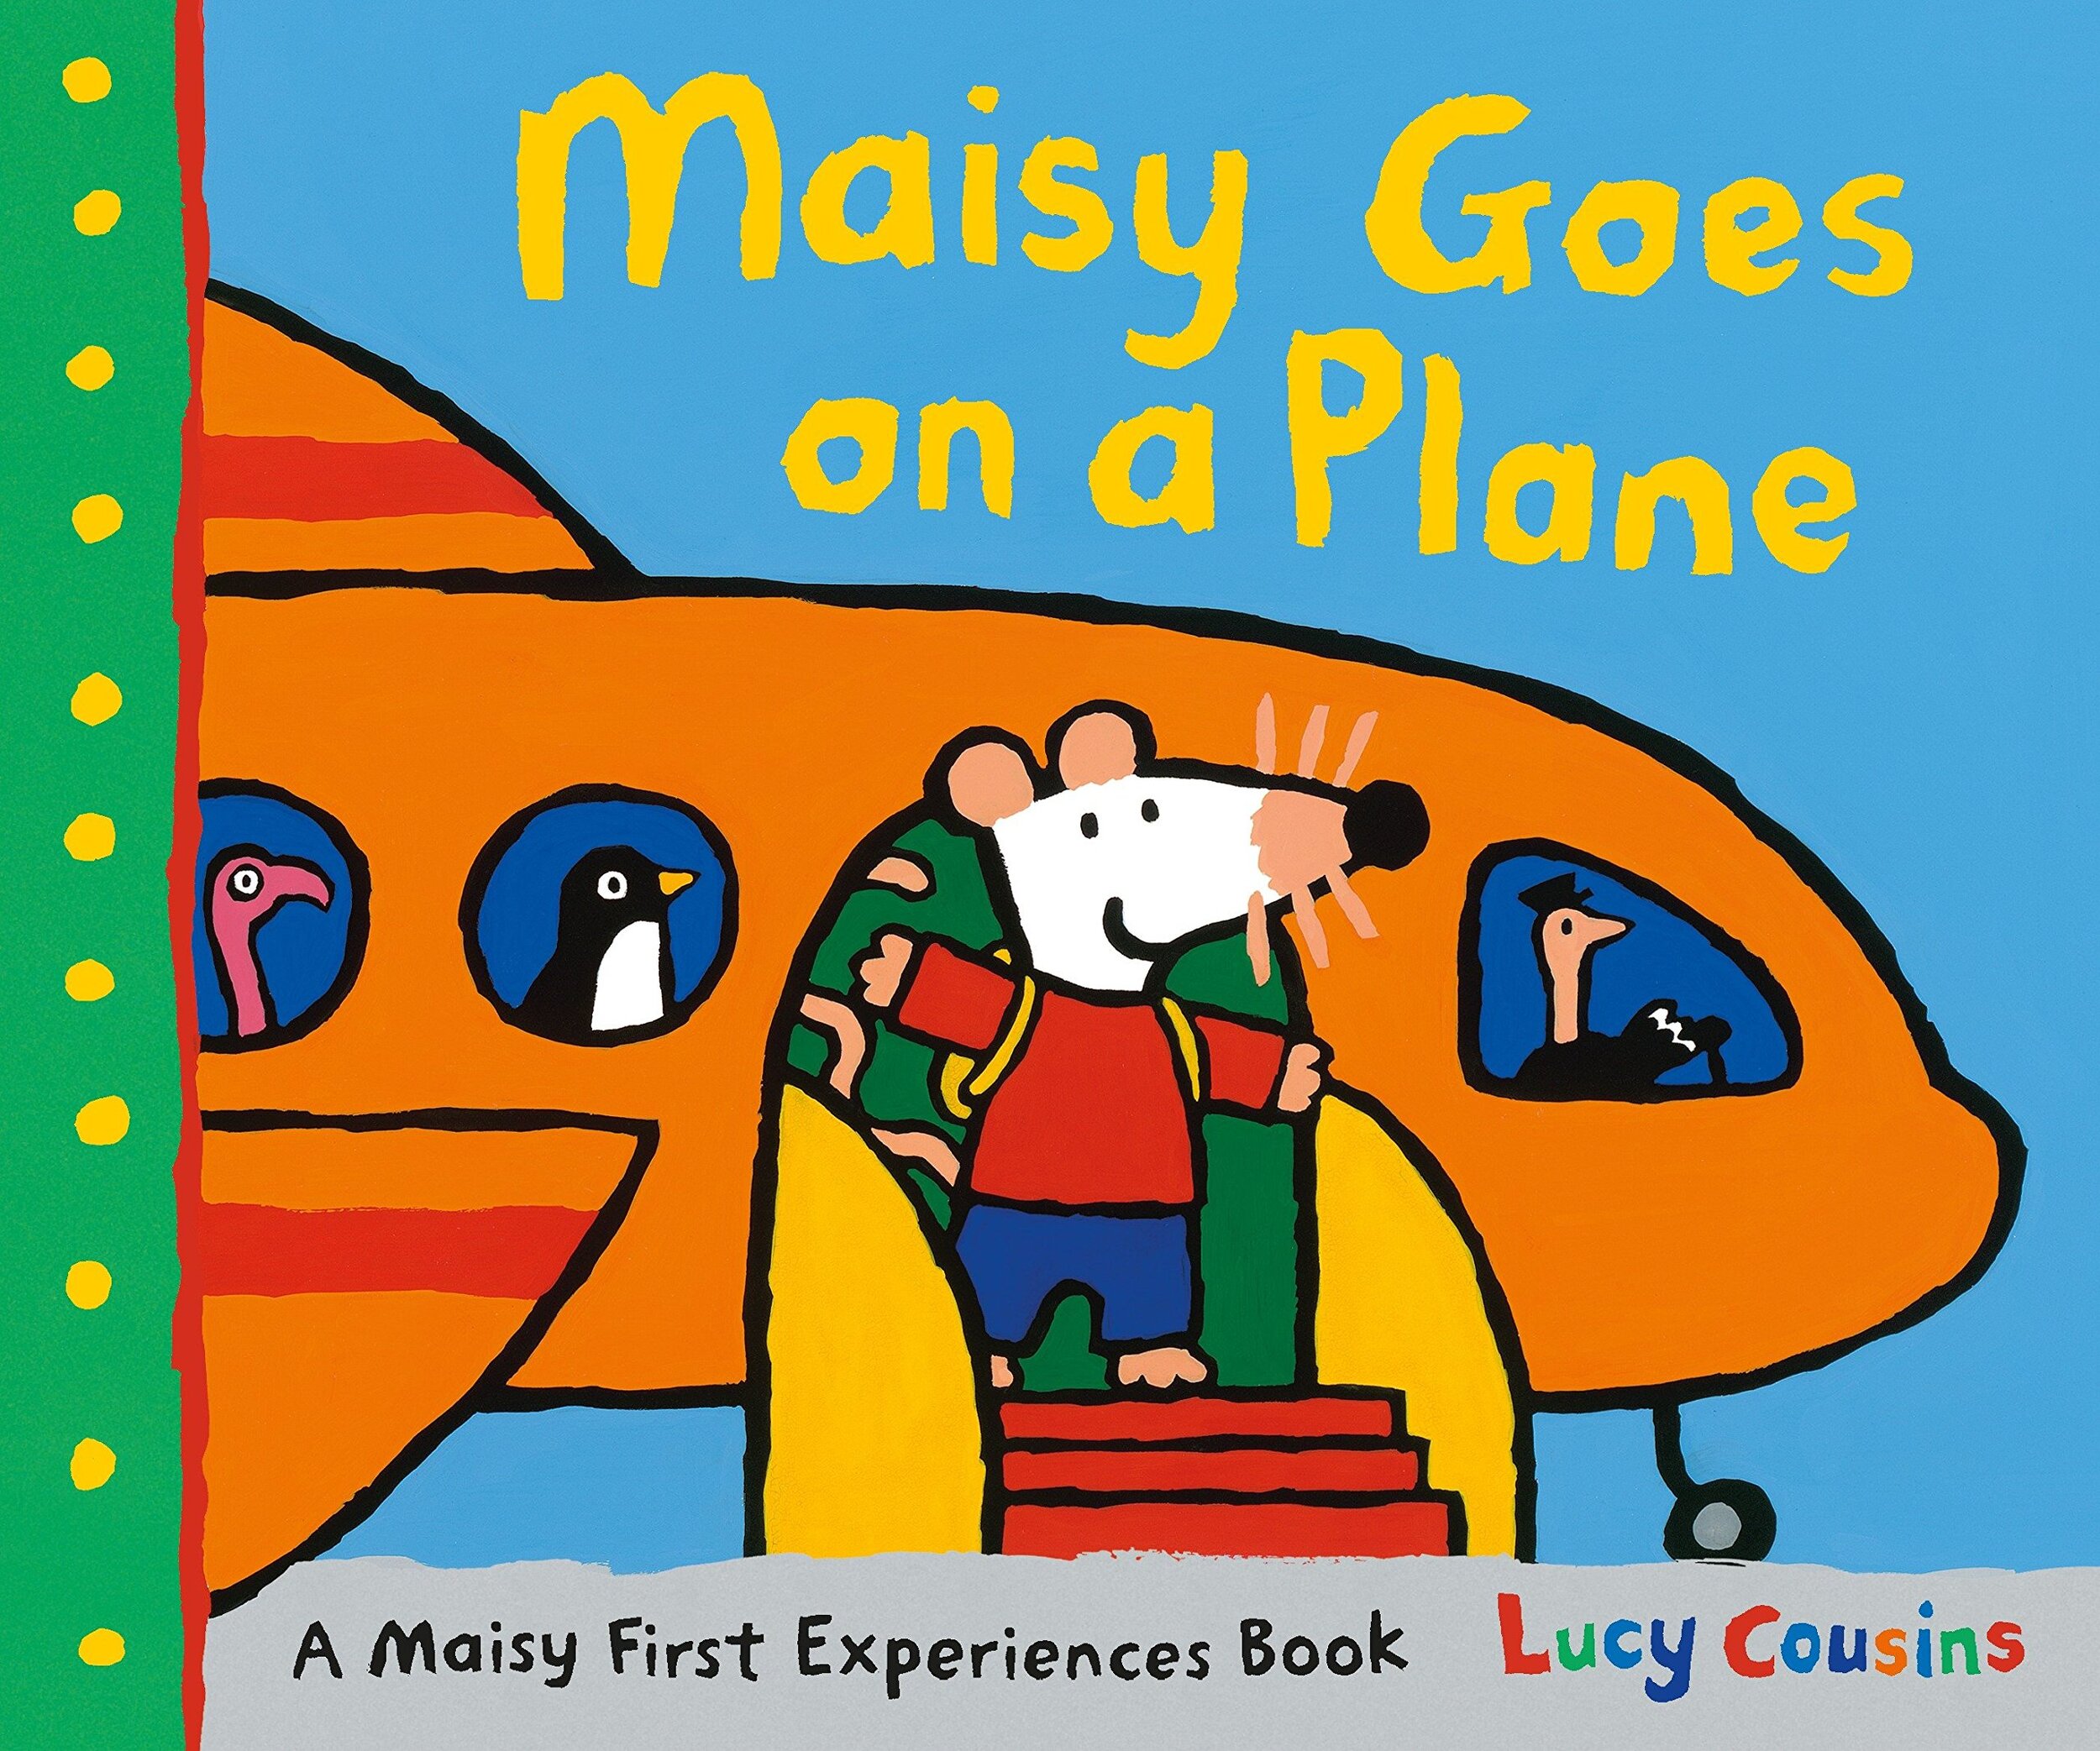 Maisy First Experiences books are great choices for preschoolers in speech therapy!